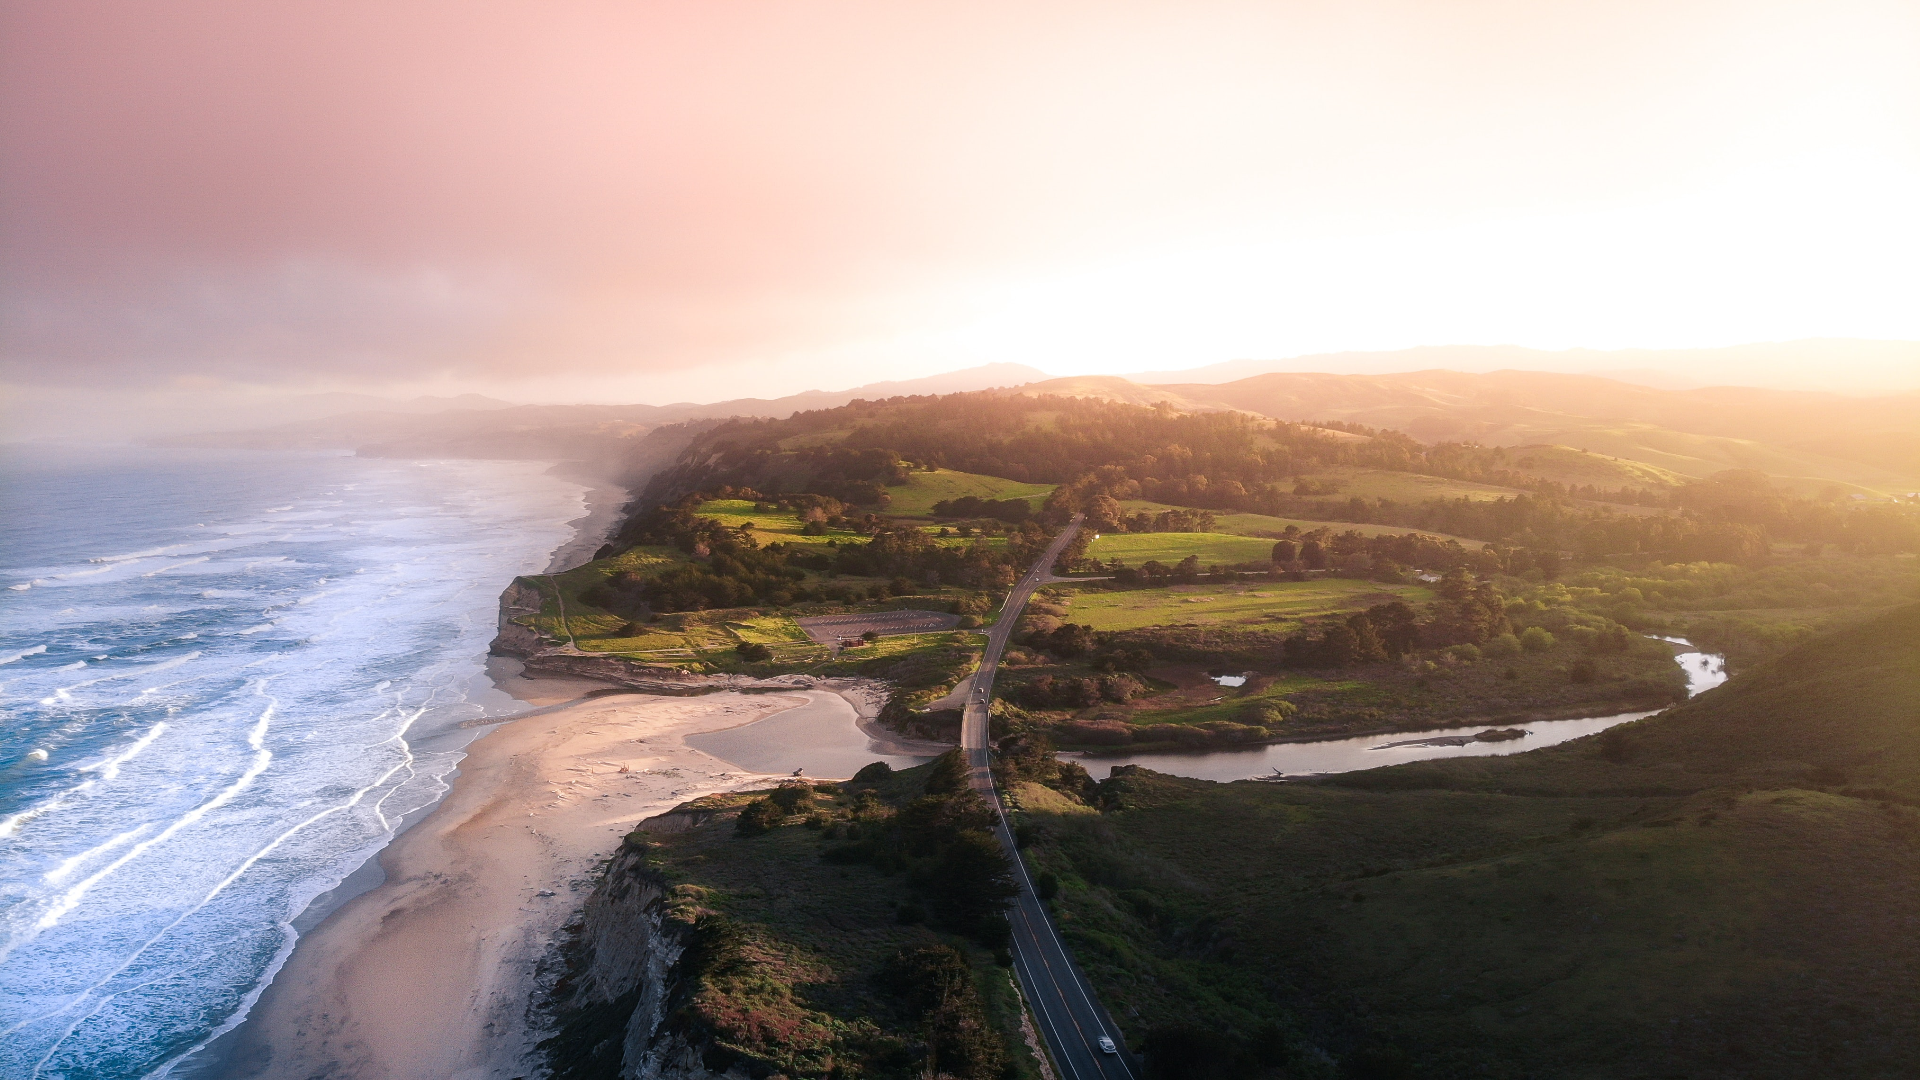 General 1920x1080 nature landscape mountains road waves sea trees grass field coast beach sand mist Pacific Ocean aerial view drone photo